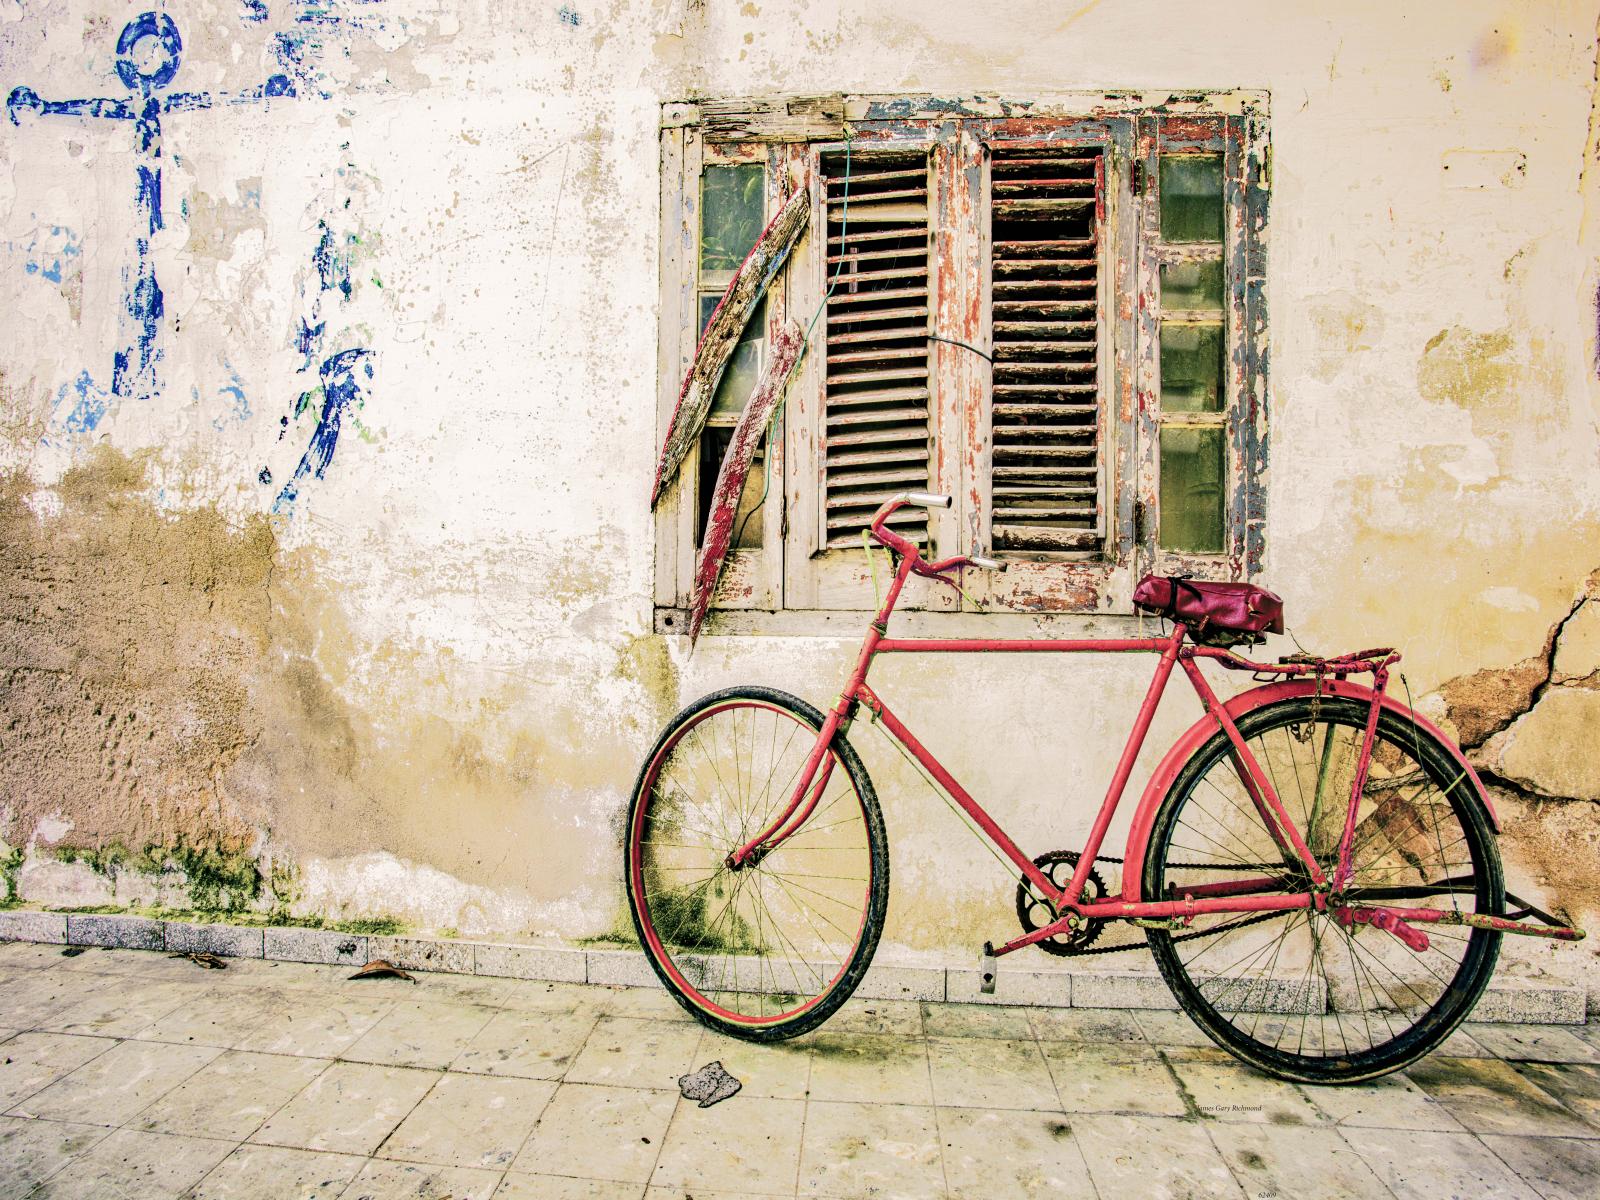 62409 bicycle, architecture  warm moody  5mb  .jpg